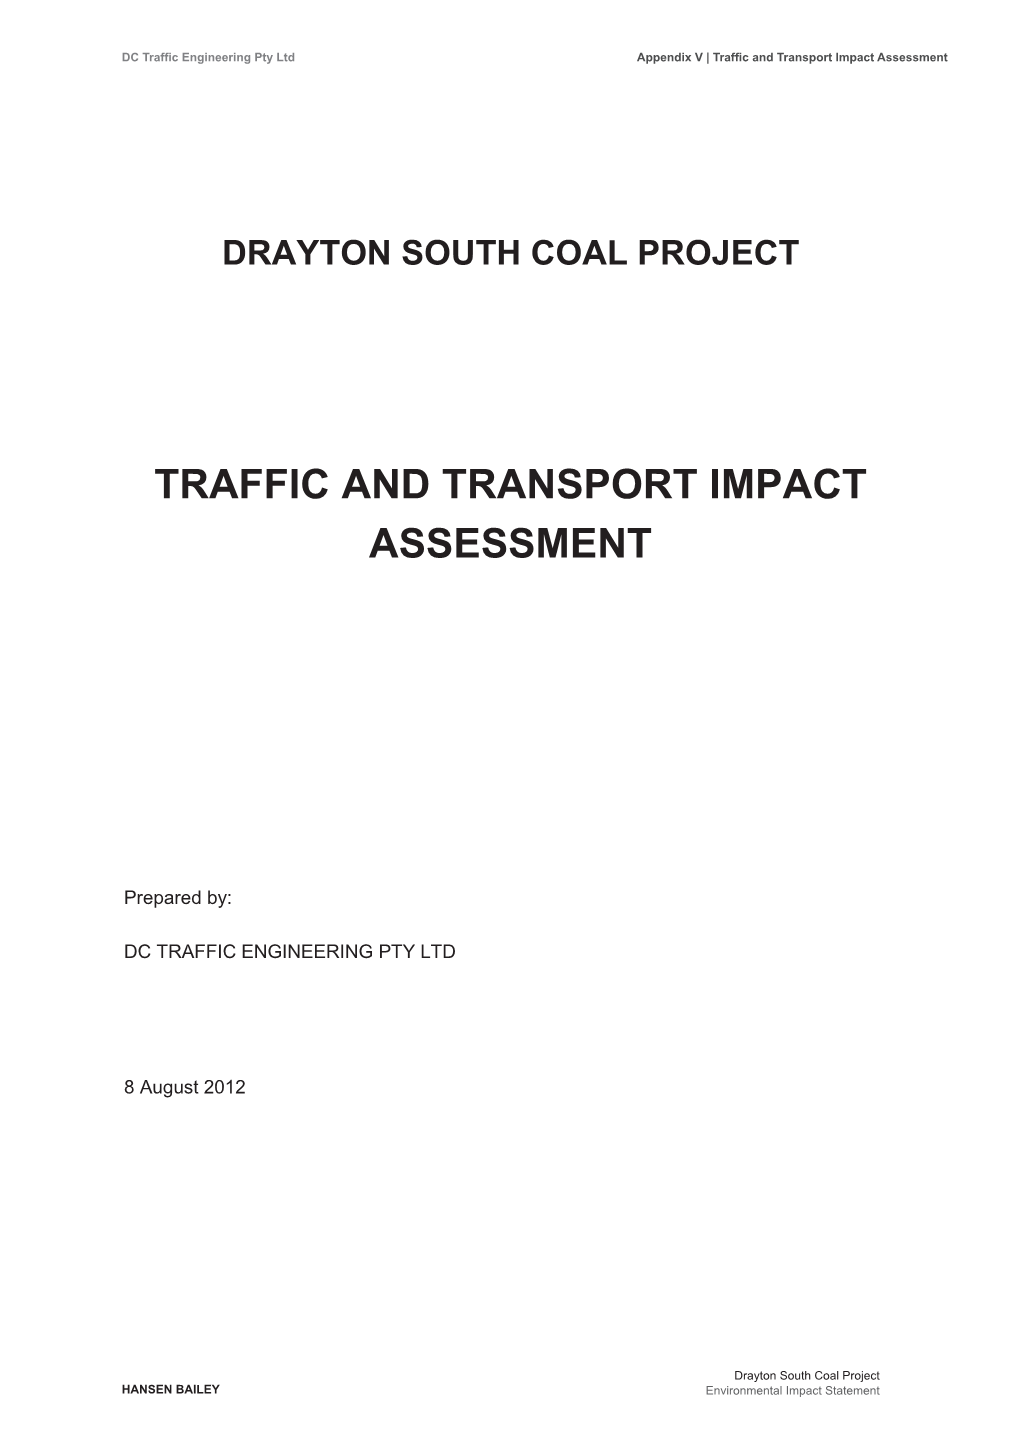 Traffic and Transport Impact Assessment